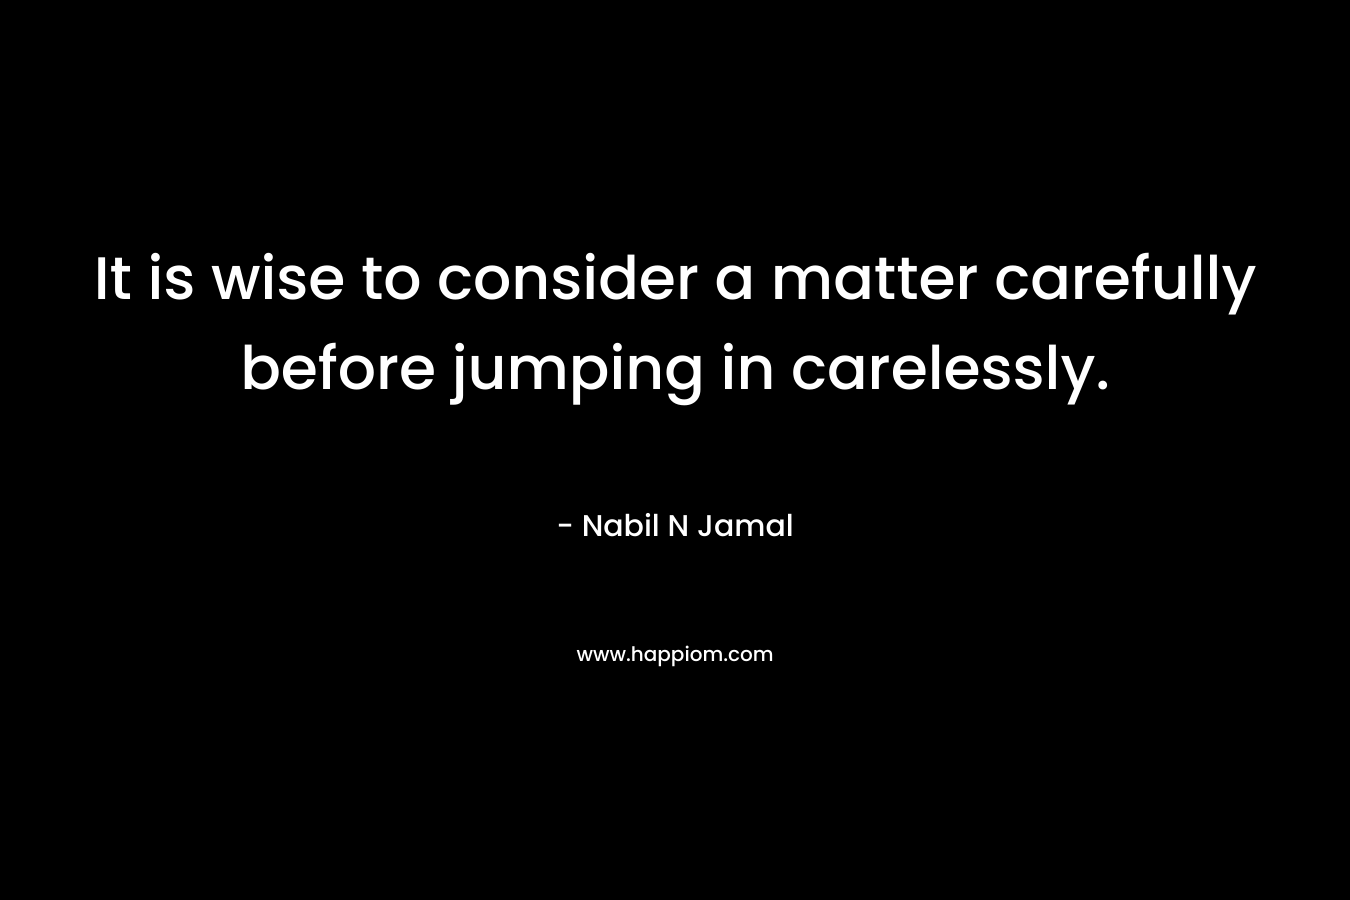 It is wise to consider a matter carefully before jumping in carelessly. – Nabil N Jamal